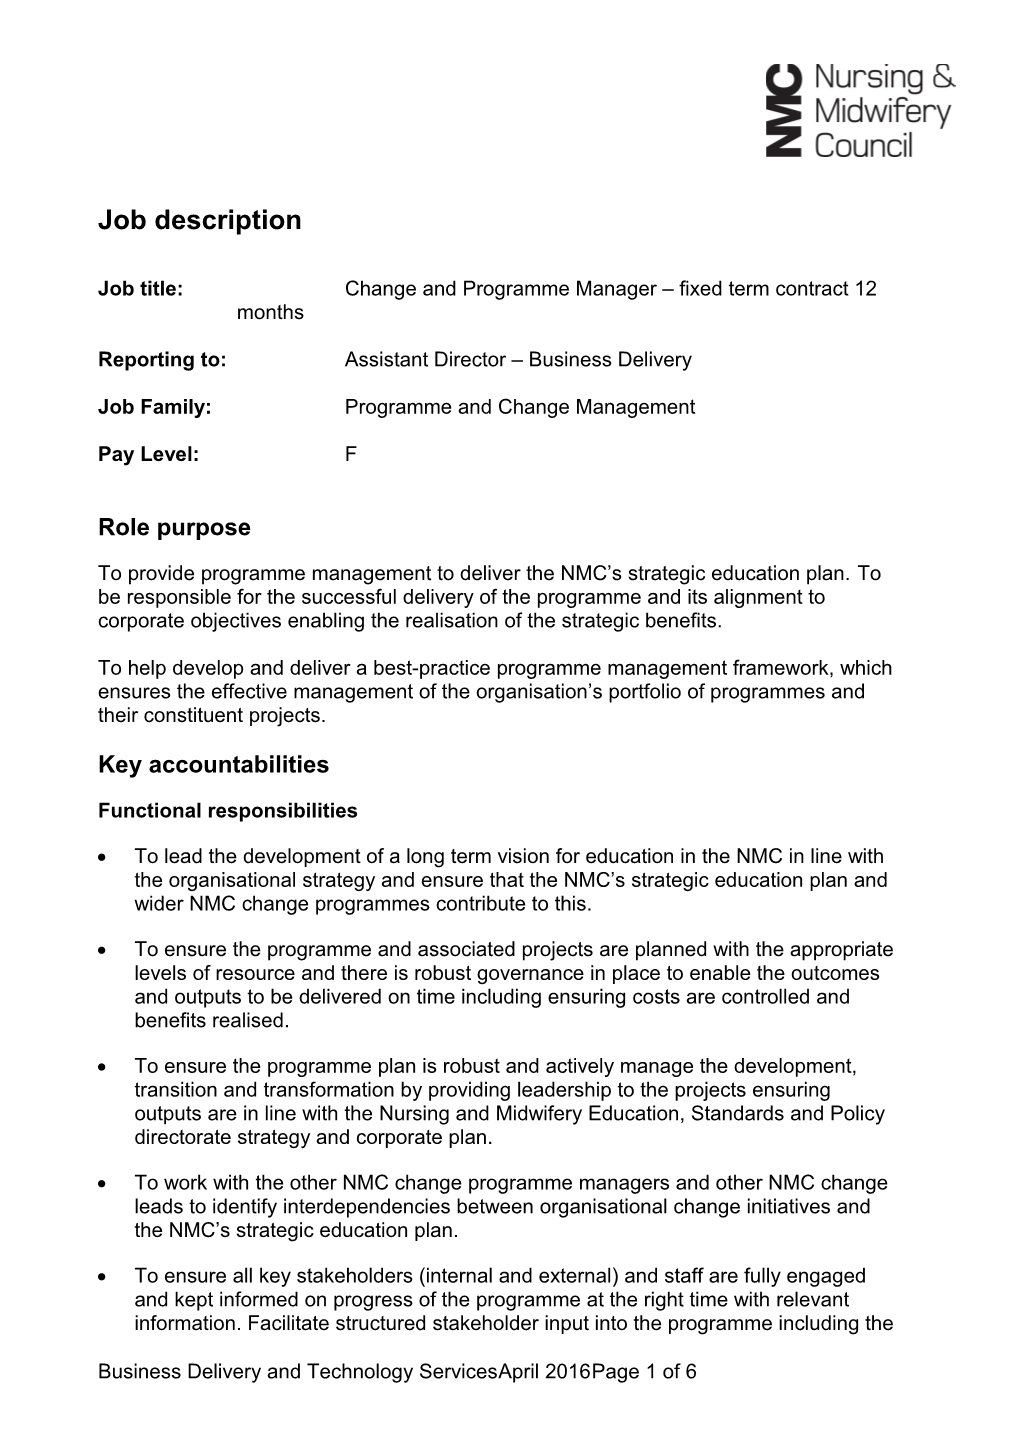 Job Title:Change and Programme Manager Fixed Term Contract 12 Months